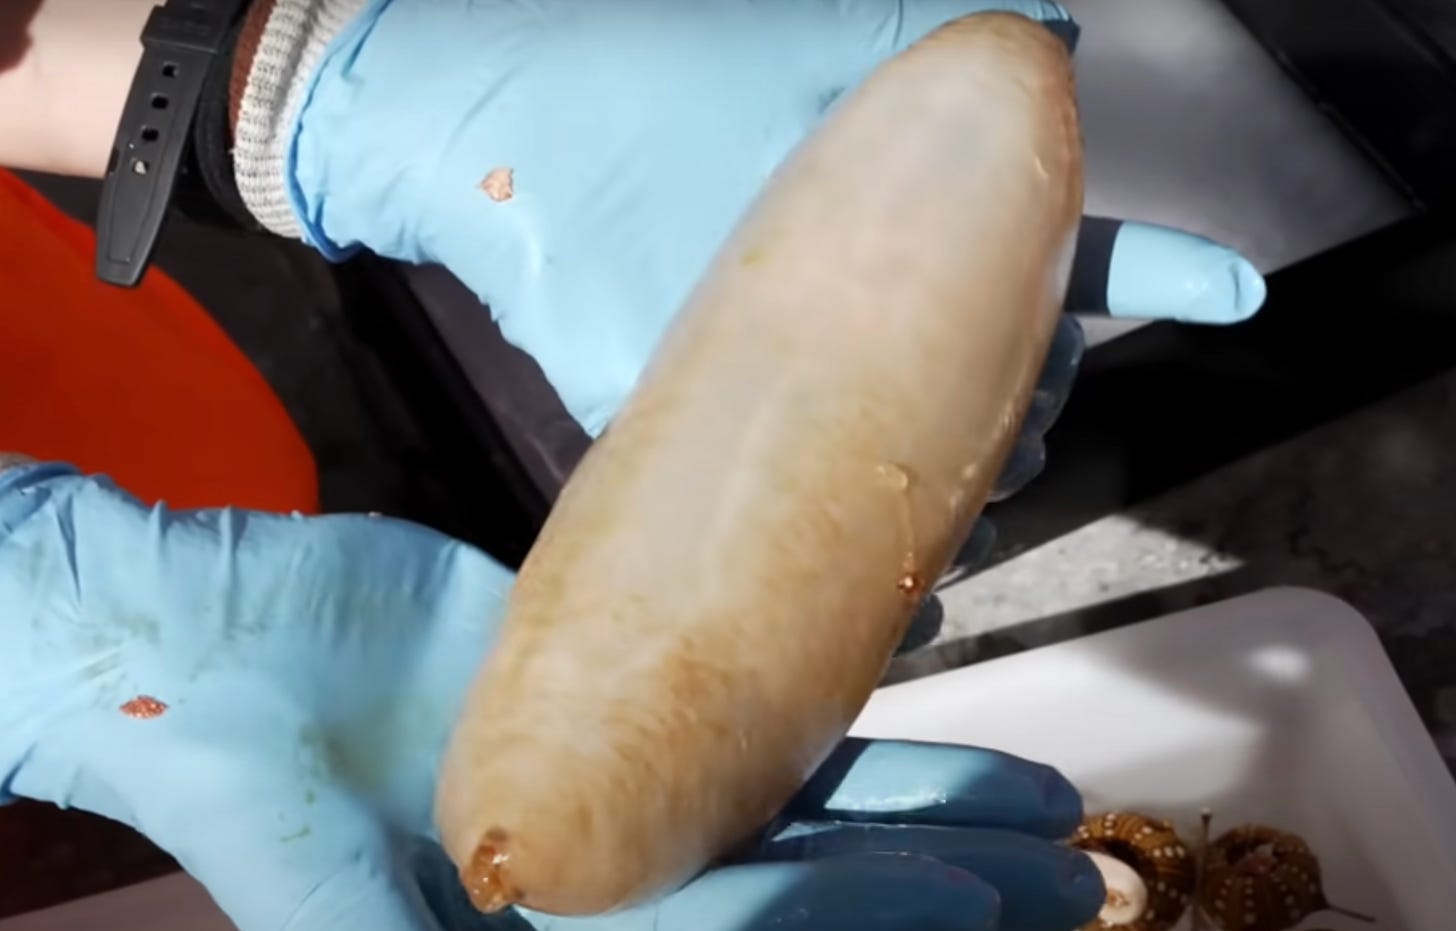 Two hands in blue rubber gloves holding out a sea cucumber. It is peach-ish, has some sort of goo coming out of one end, and looks like it might pop if poked with a pin.